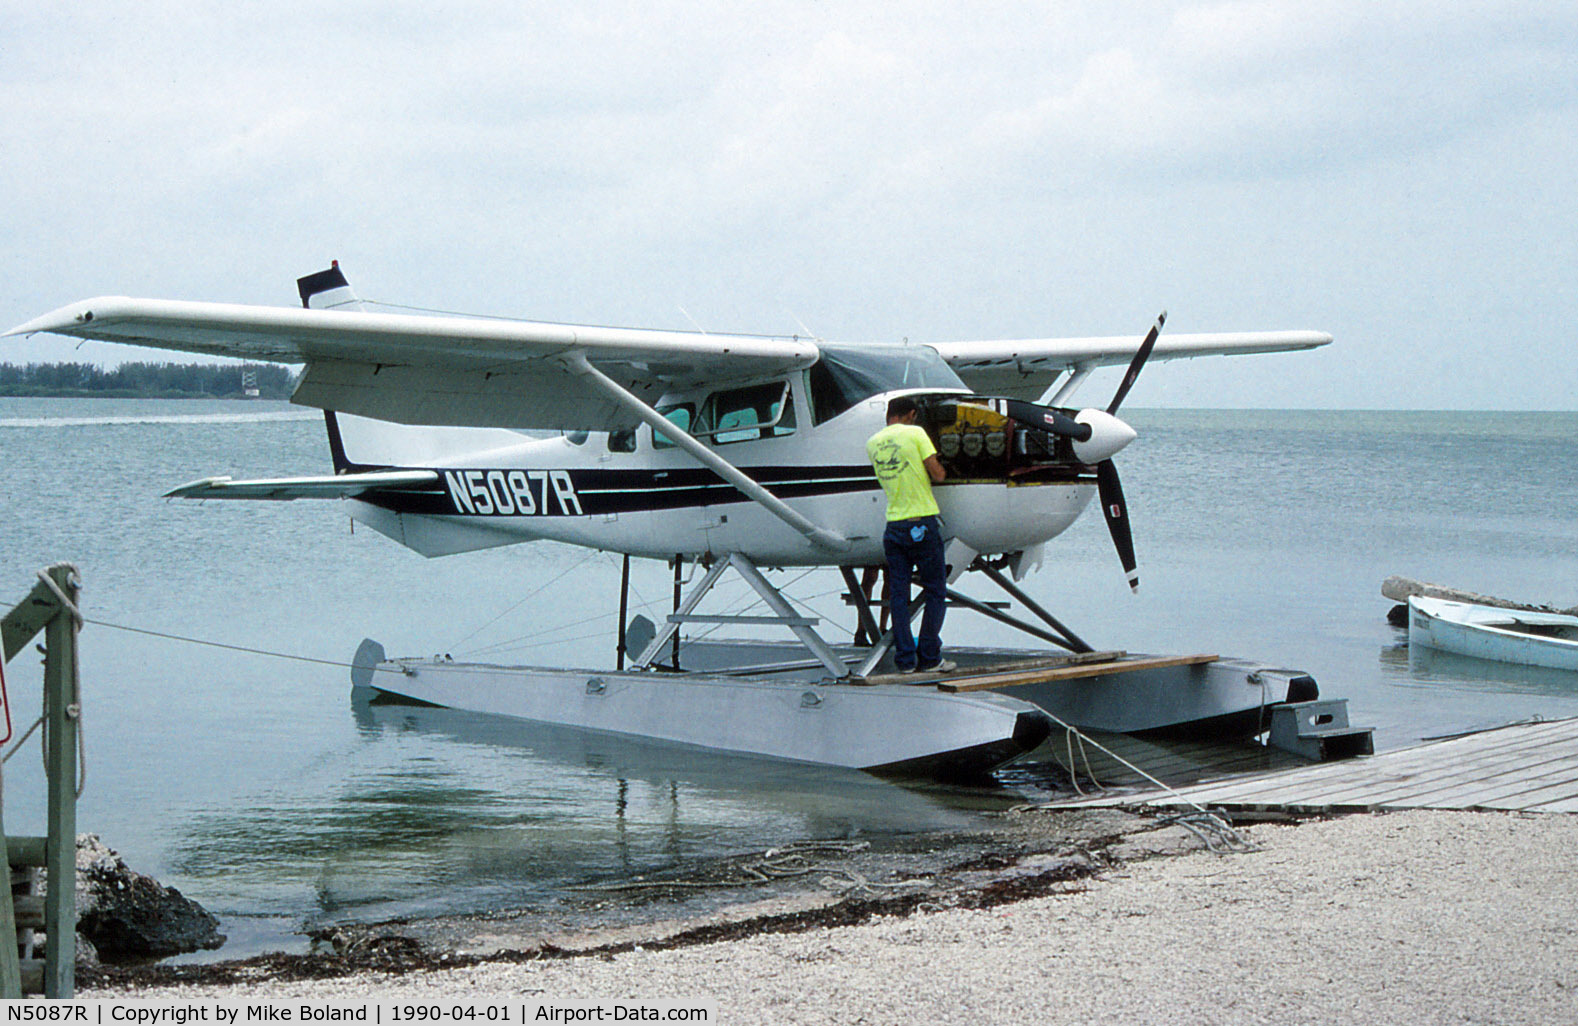 N5087R, 1984 Cessna U206G Stationair C/N U20606811, 1984 Cessna U206G N5087R at Fort Jefferson, Dry Tortugas, Monroe County, Florida,  in April 1990.